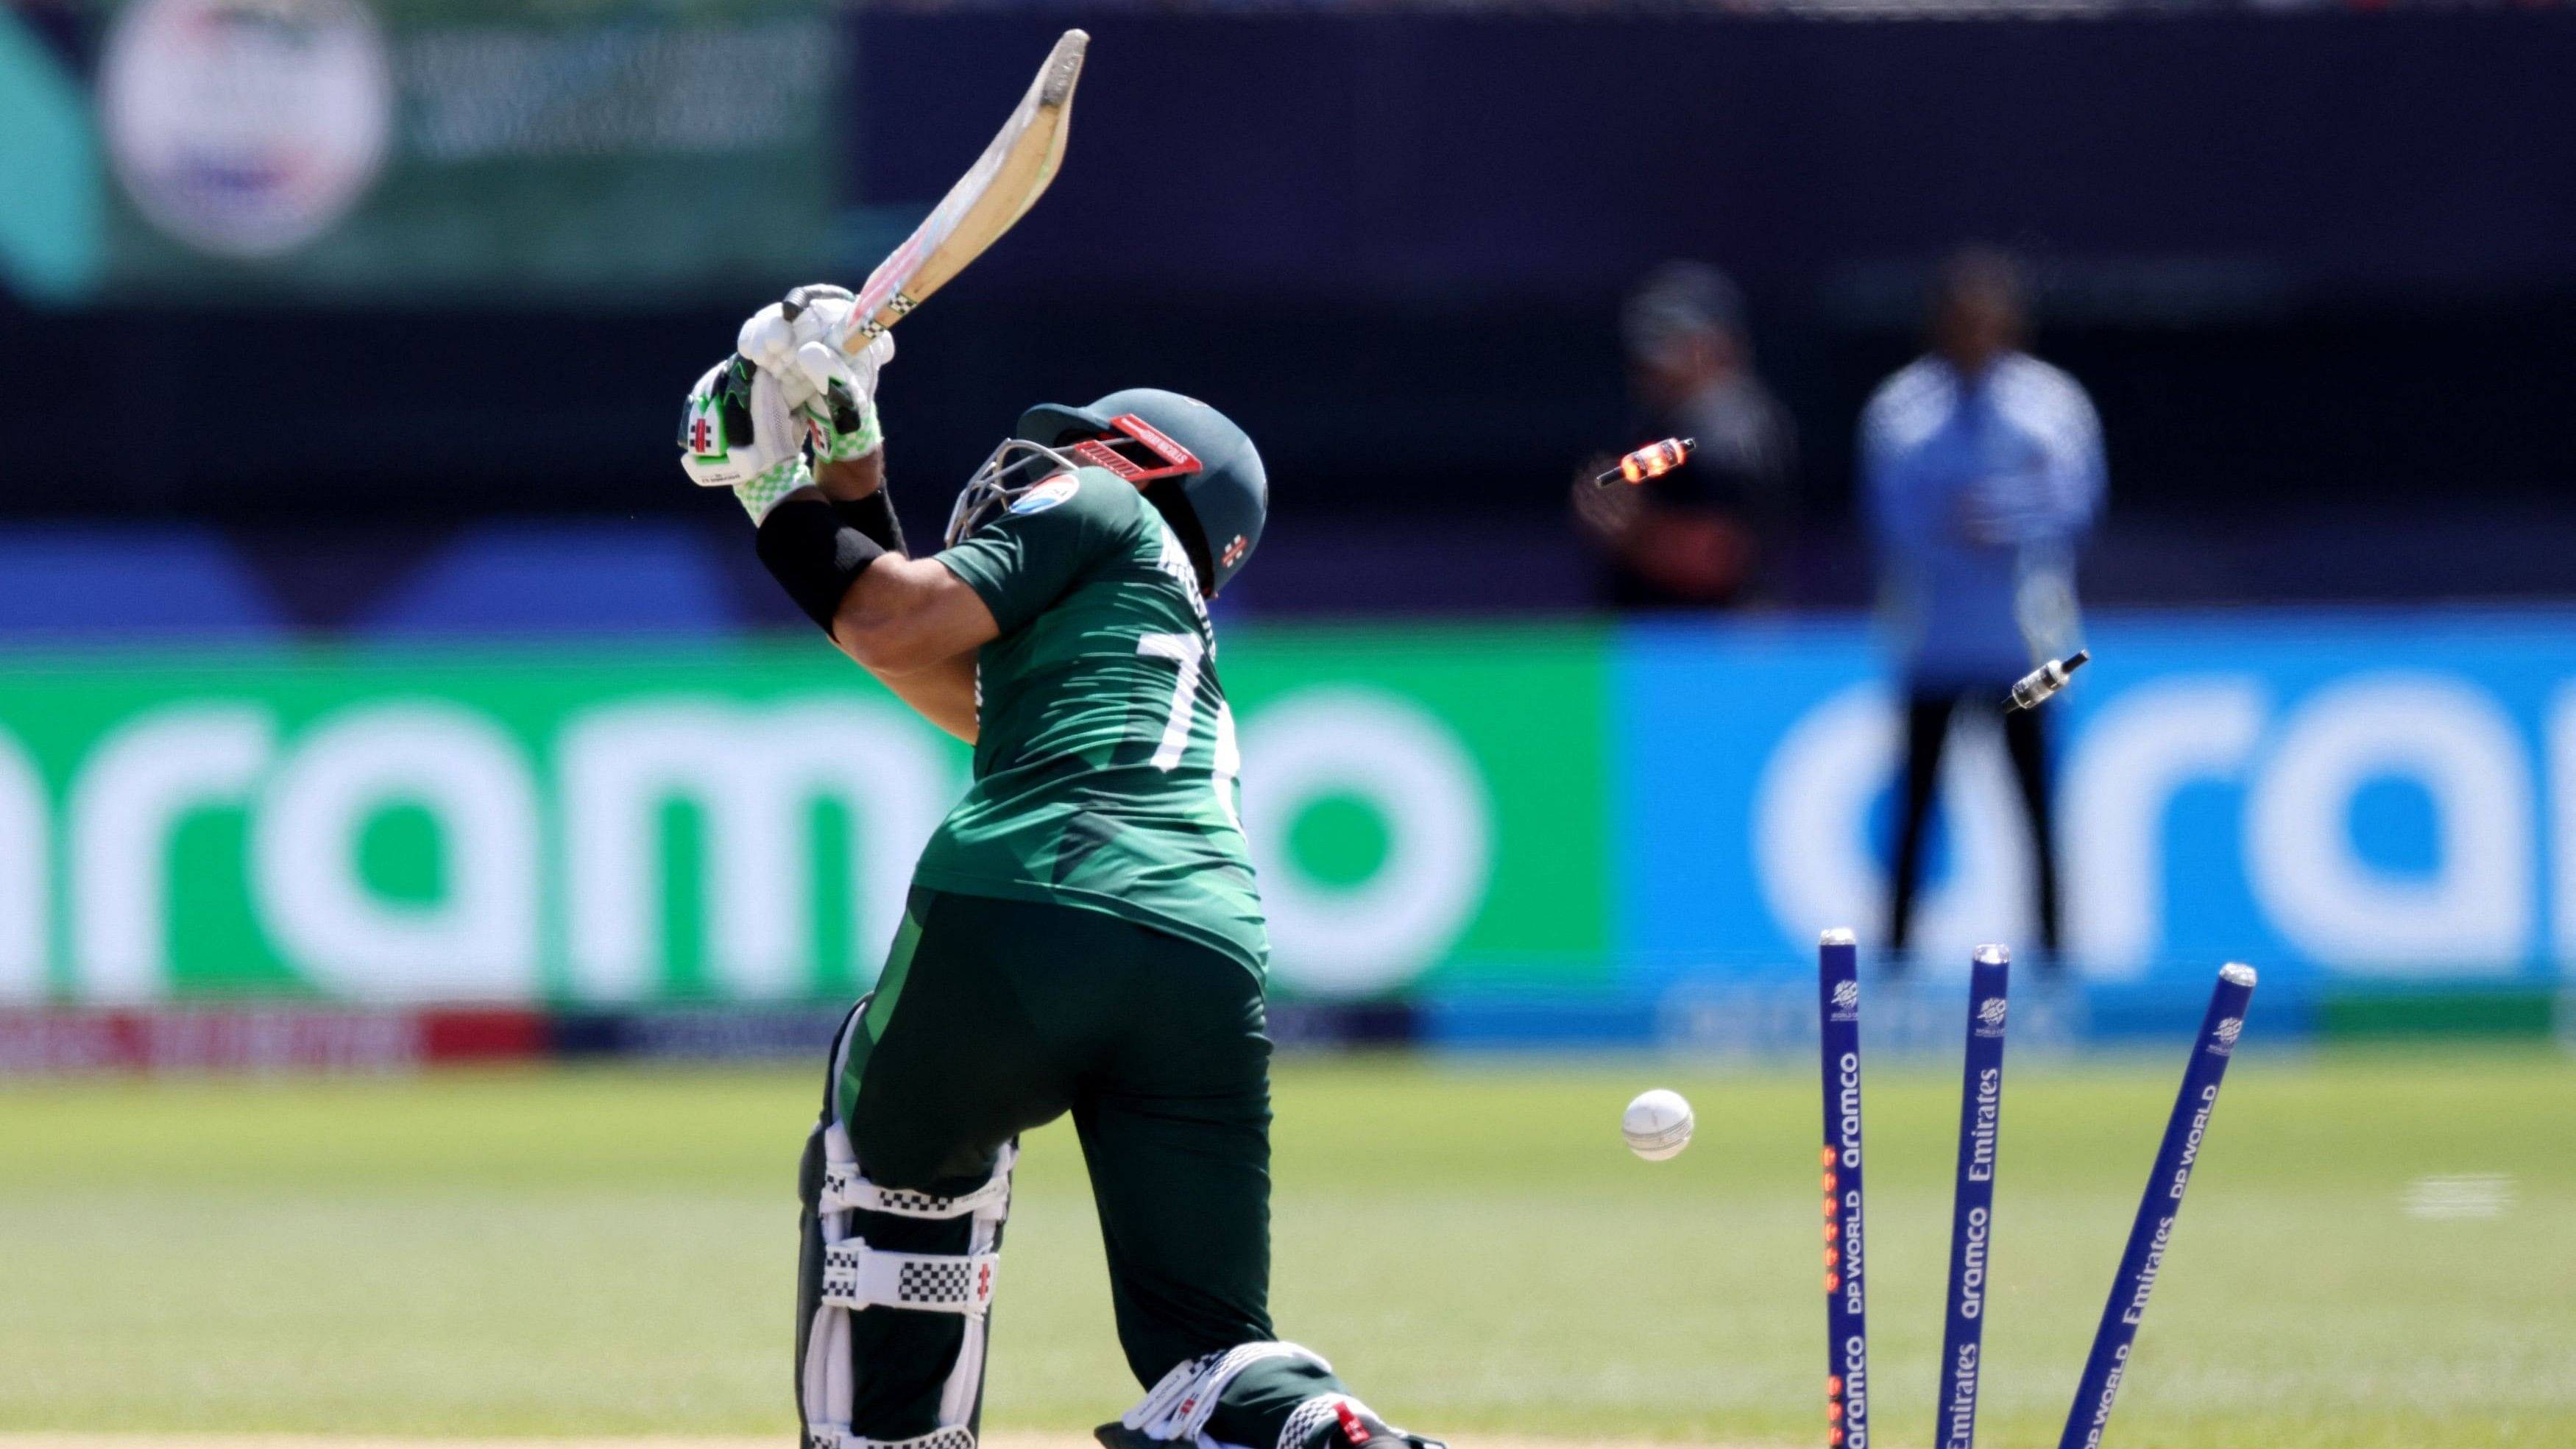 <div class="paragraphs"><p> Pakistan's Mohammad Rizwan after getting bowled out against India during their match in the T20 World Cup.</p></div>